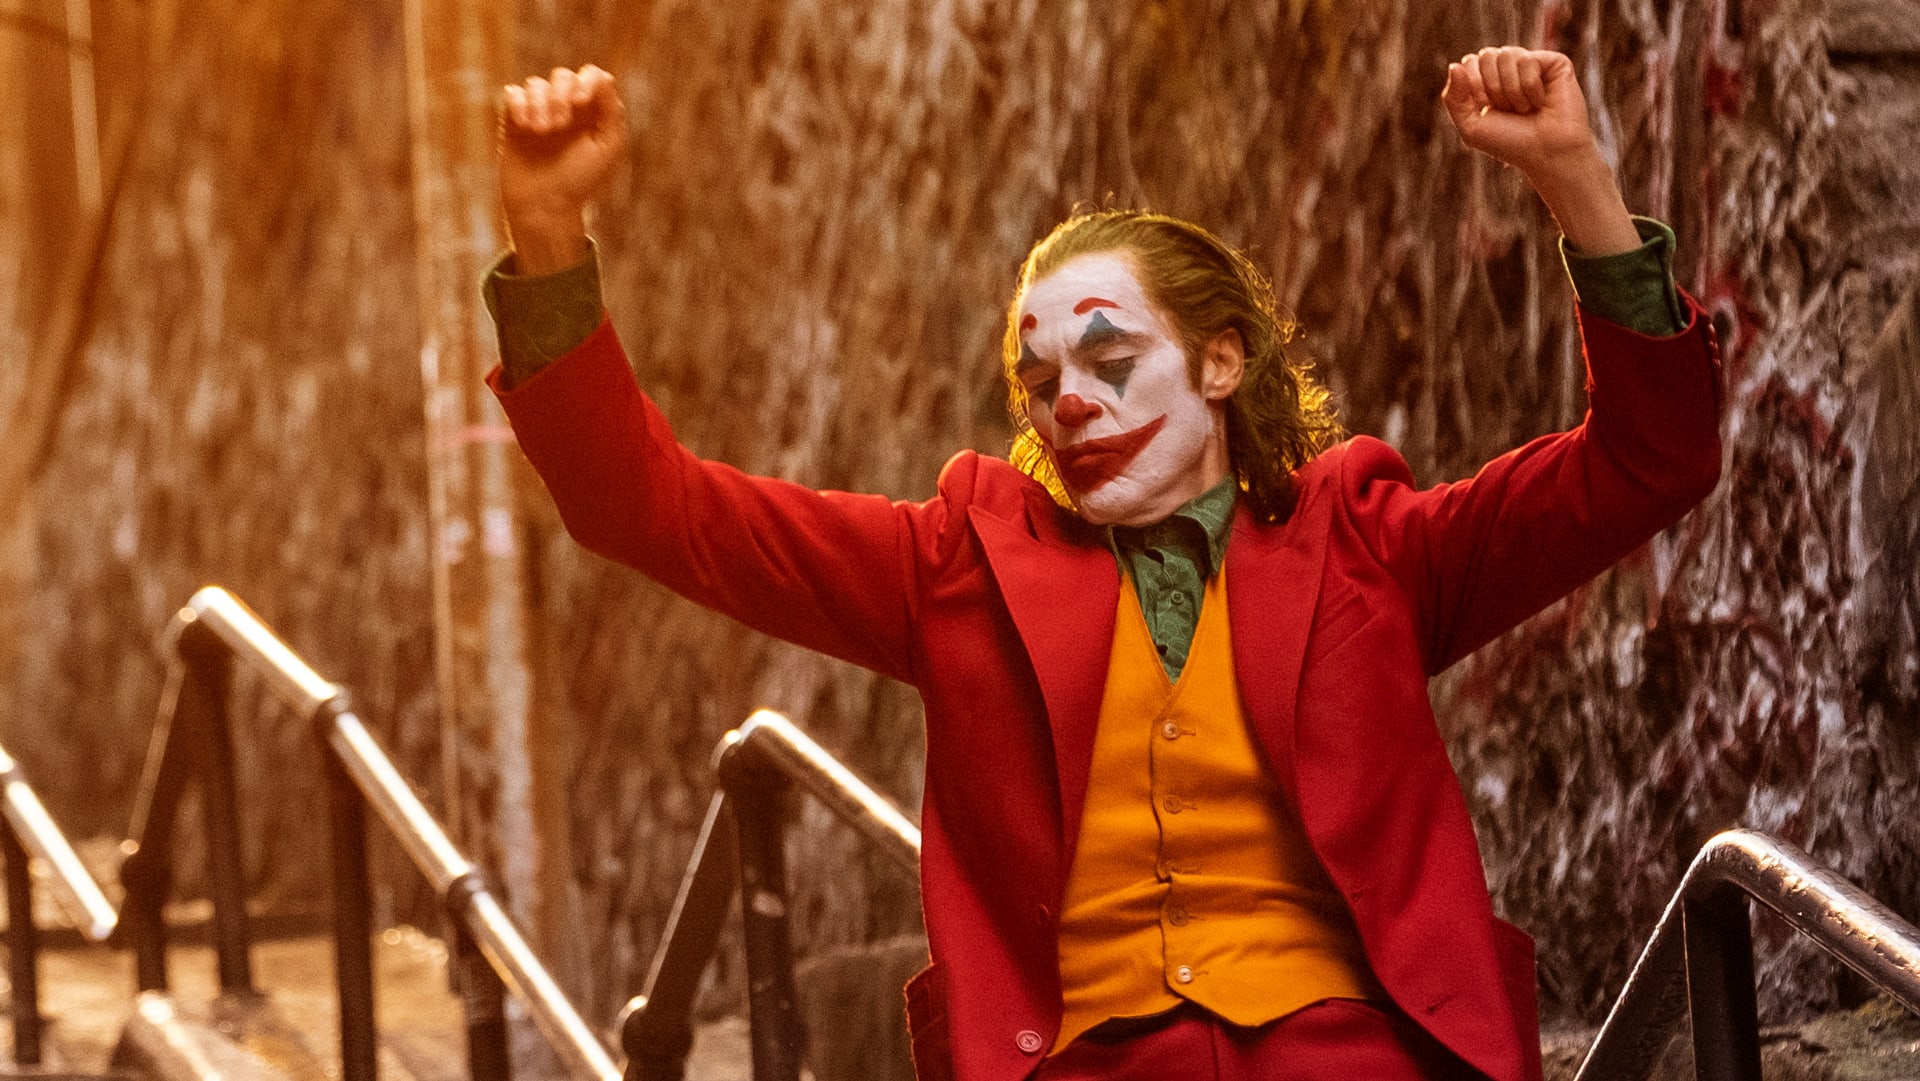 The internet crowdsourced some other songs for Joker to dance to besides Gary Glitter